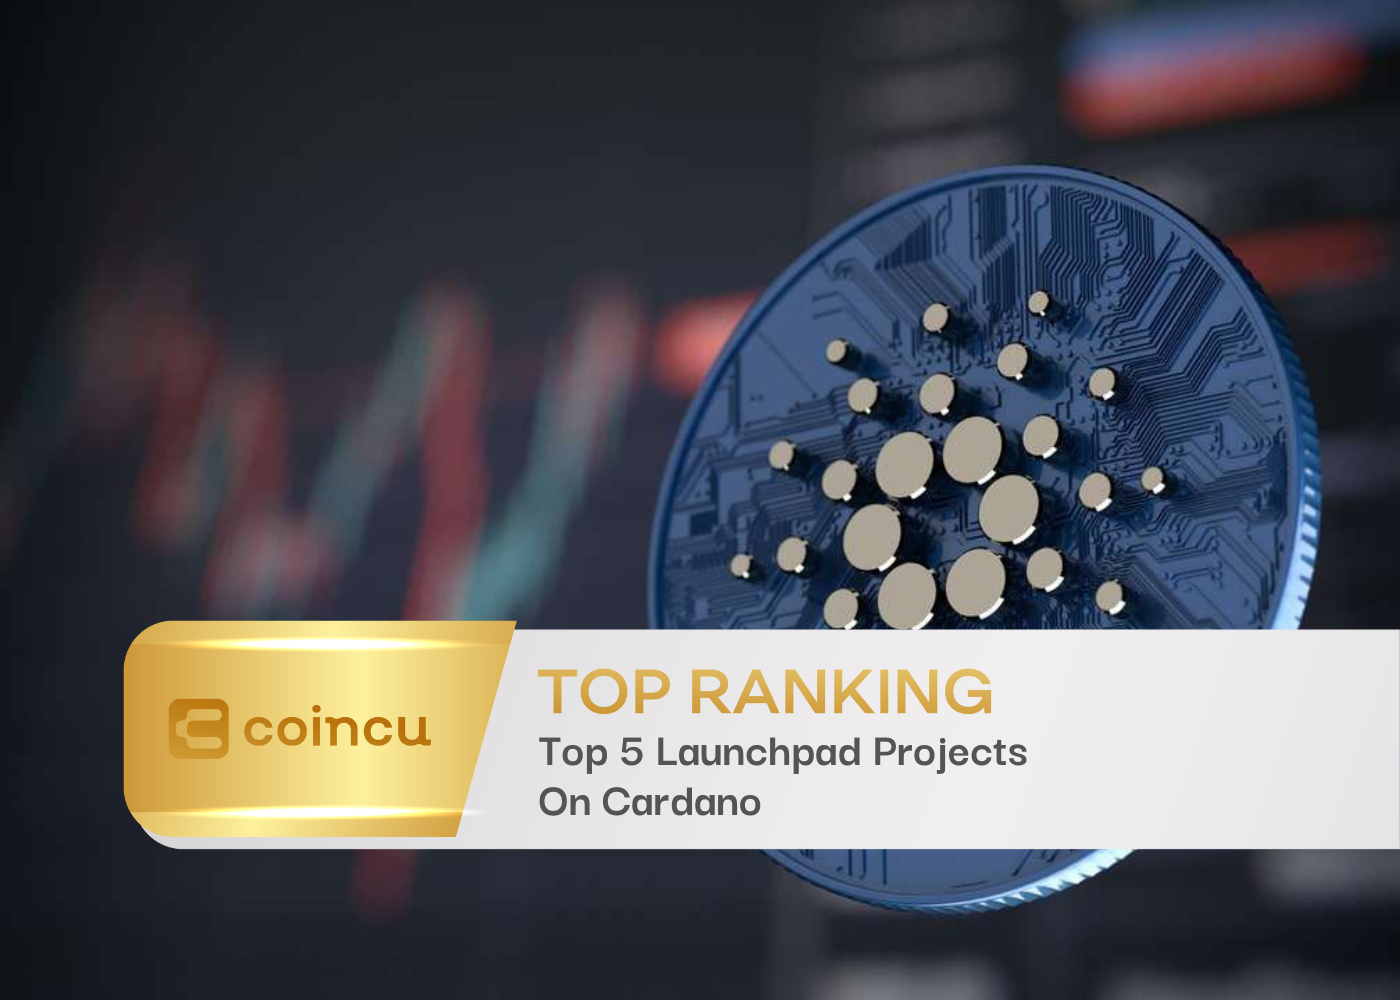 Top 5 Launchpad Projects